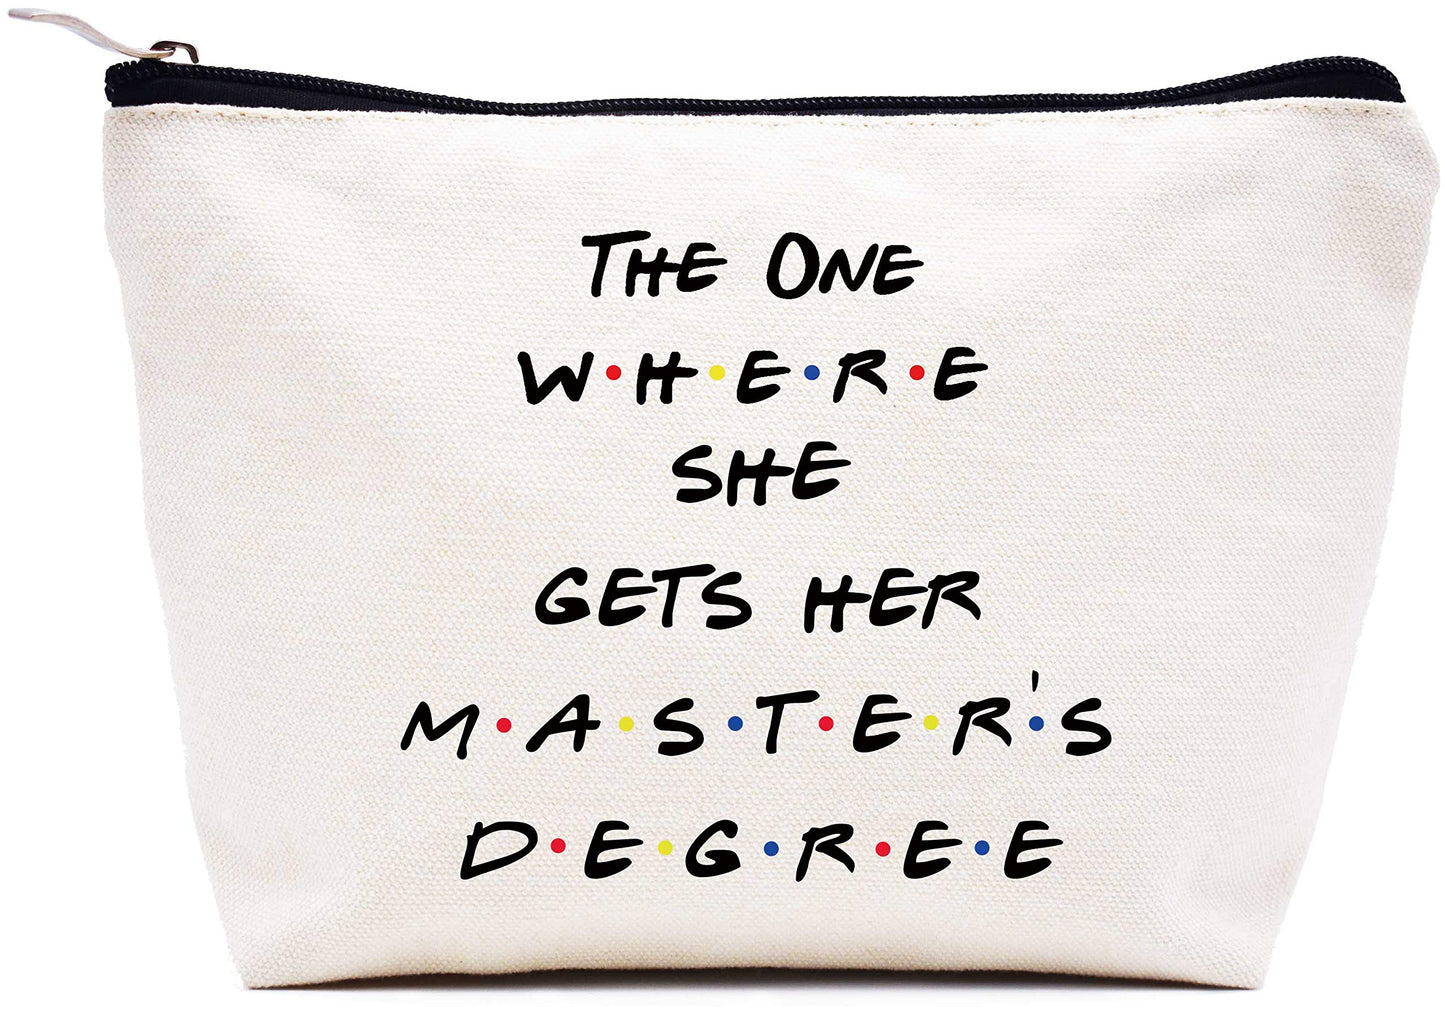 Unique Masters Degree Gift for Grad Student - MBA Gifts - Grad Student Graduation Gift for Best Friend Daughter Cousin Sister - The One Where She Gets Her Master's Degree - Makeup Bag Cosmetic Bag